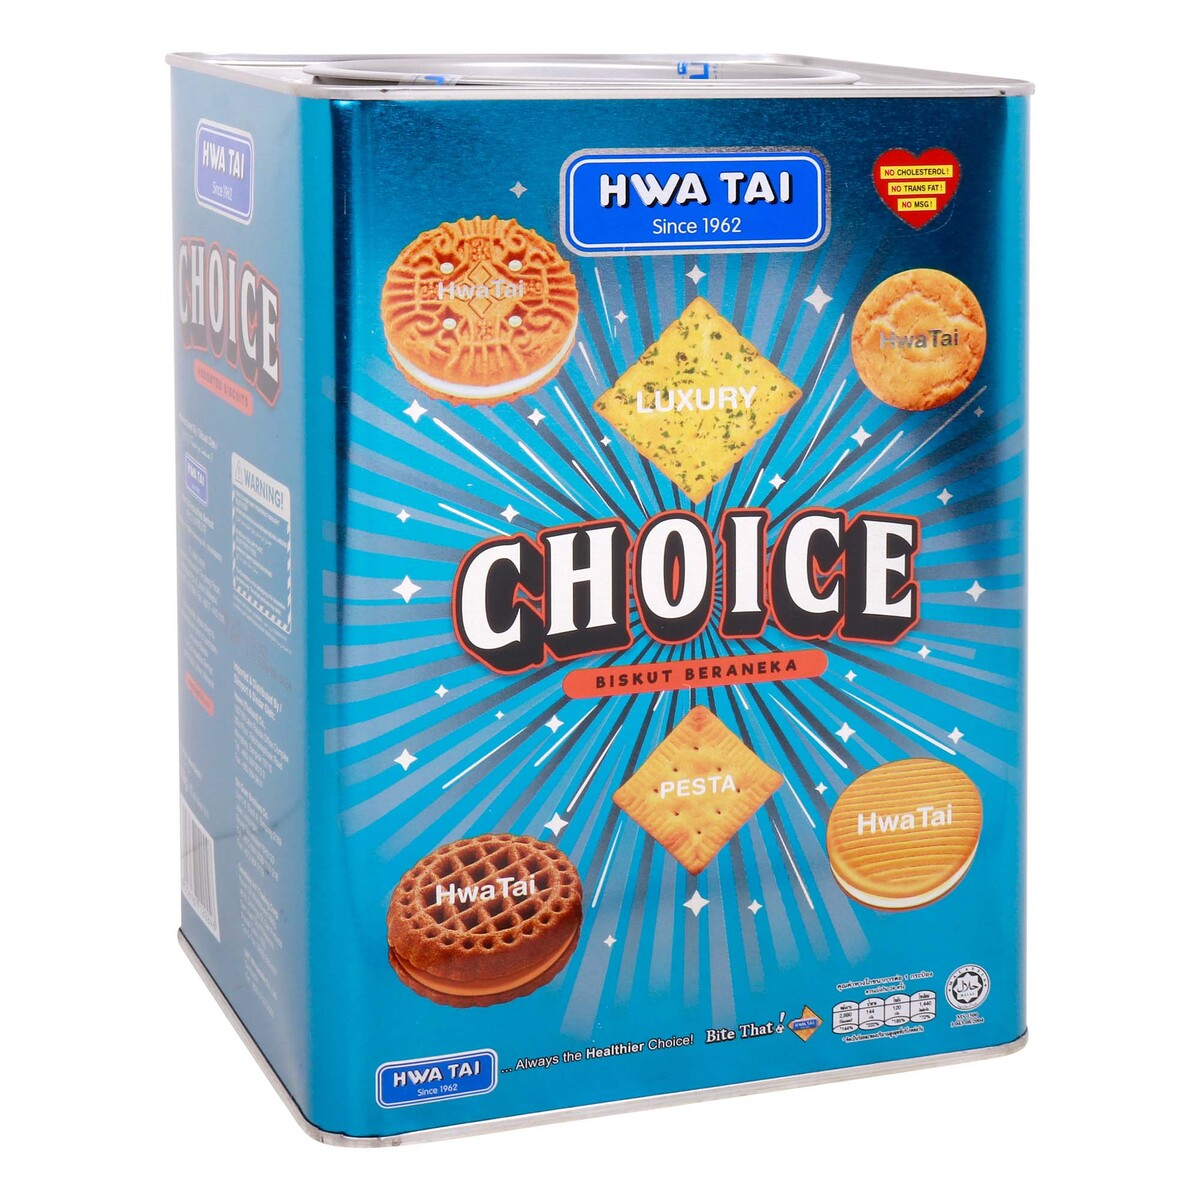 Hwa Tai Choice Assorted Biscuits, 600 g